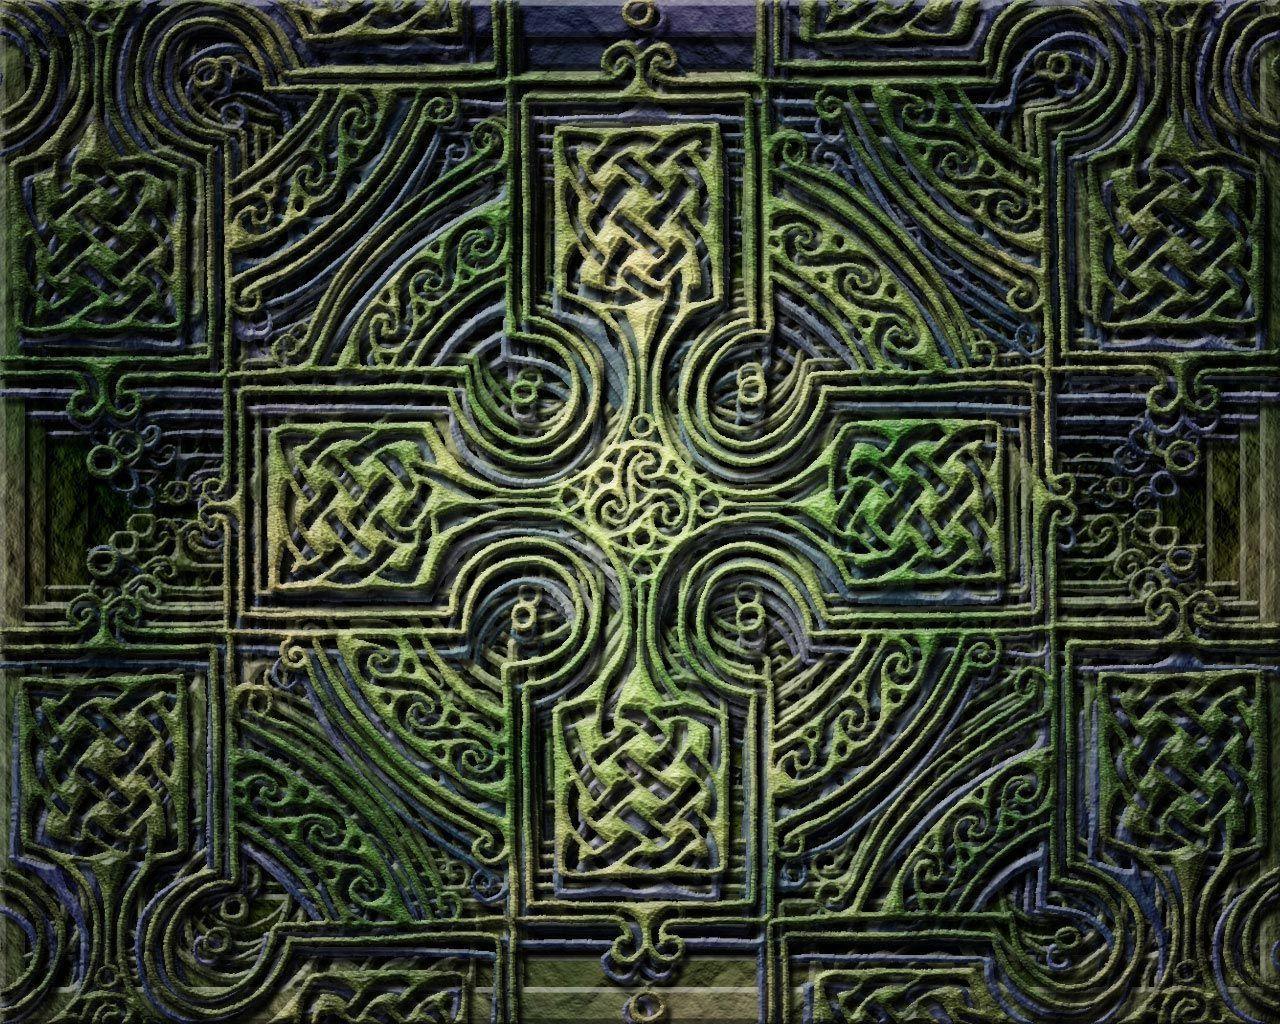 Celtic Knot Phone Wallpapers